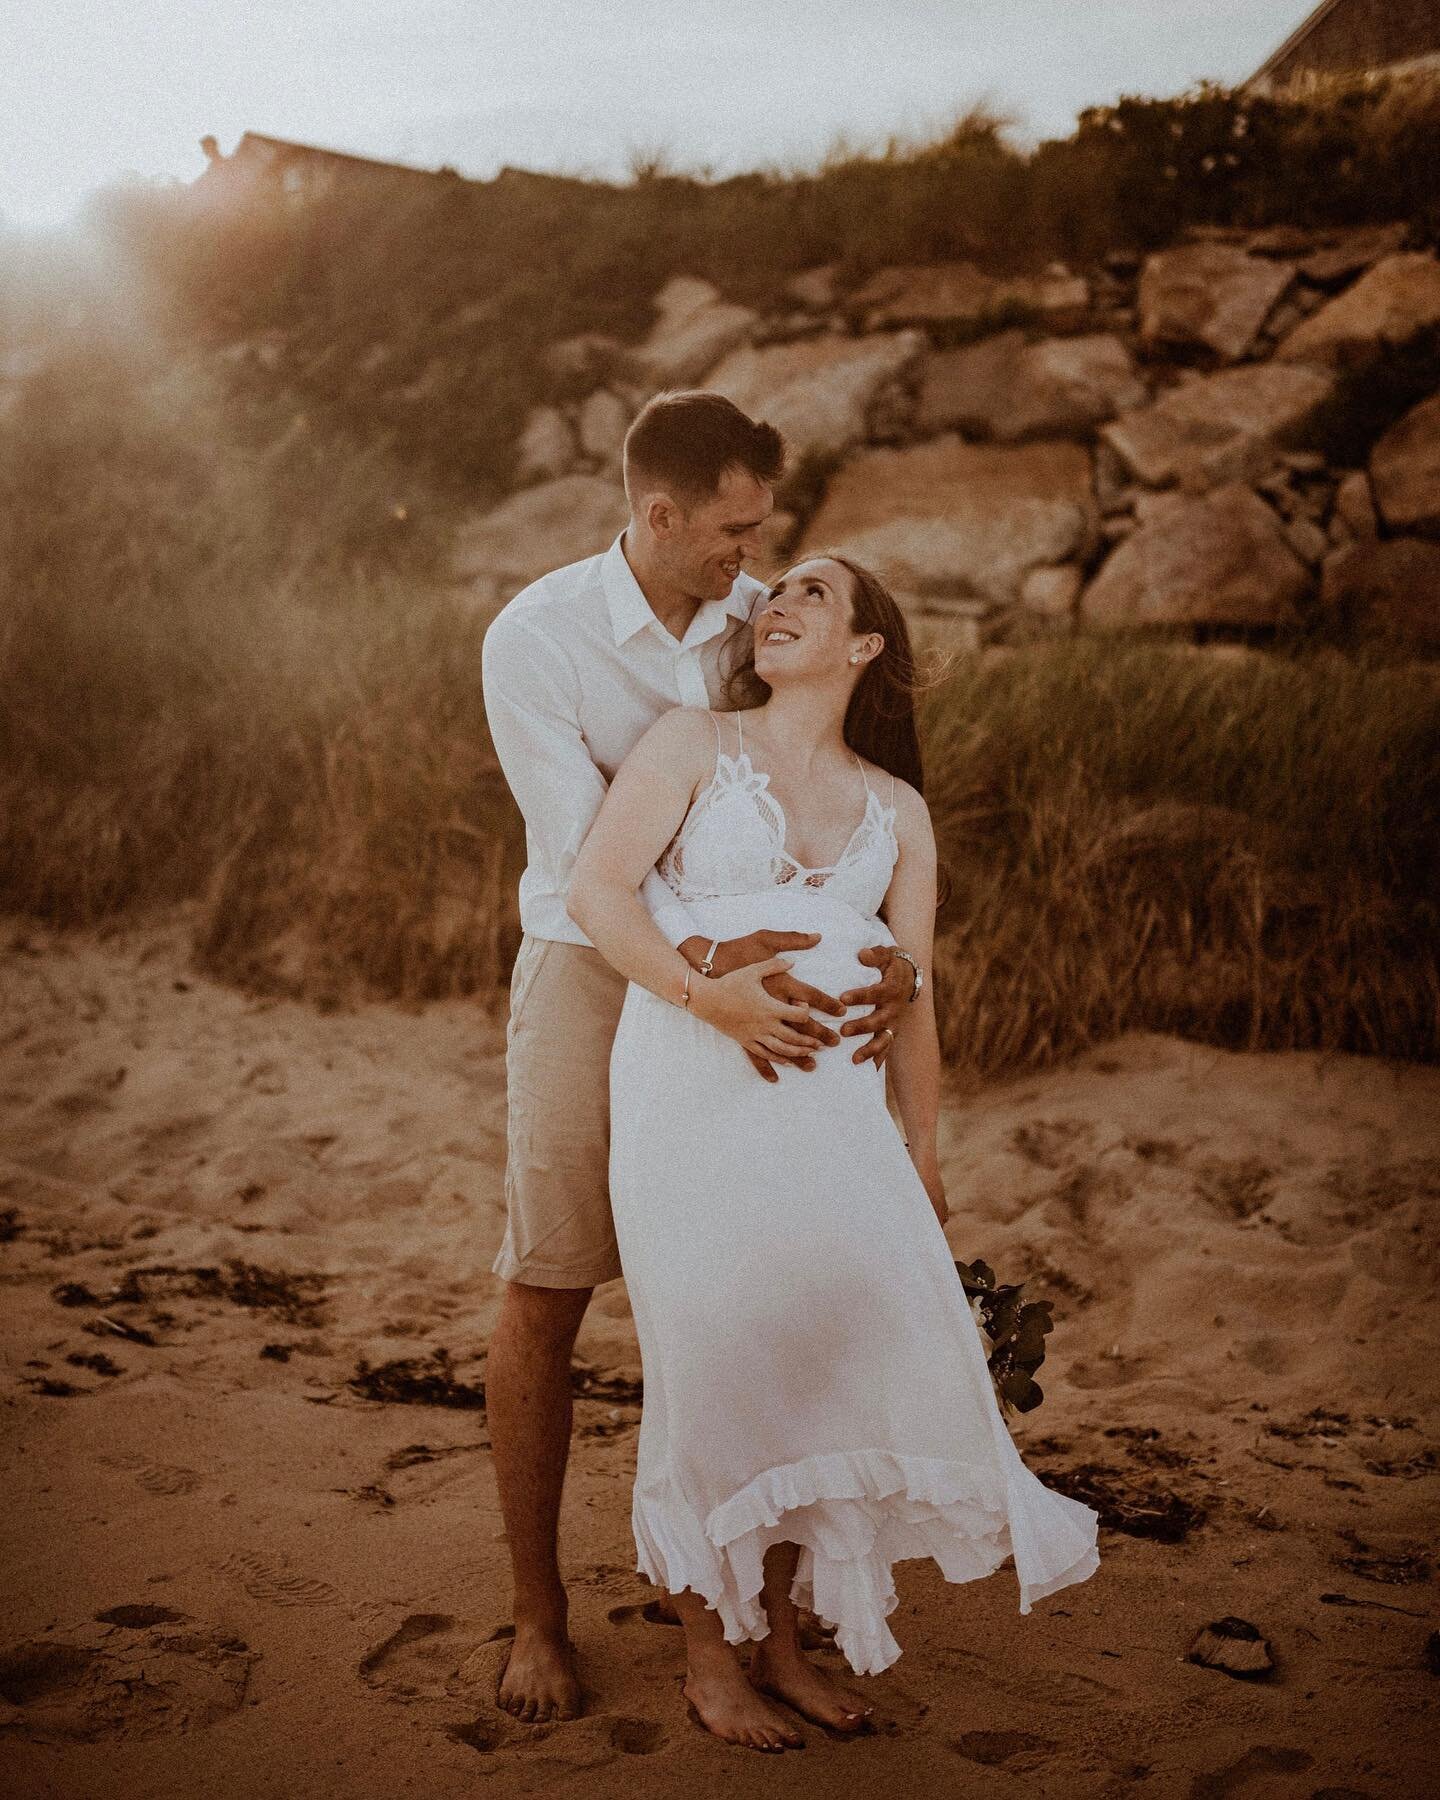 nikki &amp; ben&rsquo;s elopement last summer at the cape 🌊 
⠀⠀⠀⠀⠀⠀⠀⠀⠀
their baby girl has been earth side for a while but i&rsquo;m just now sharing their photos 🥲 but look how beautiful they are!!! straight out of a rom com movie! after sharing t